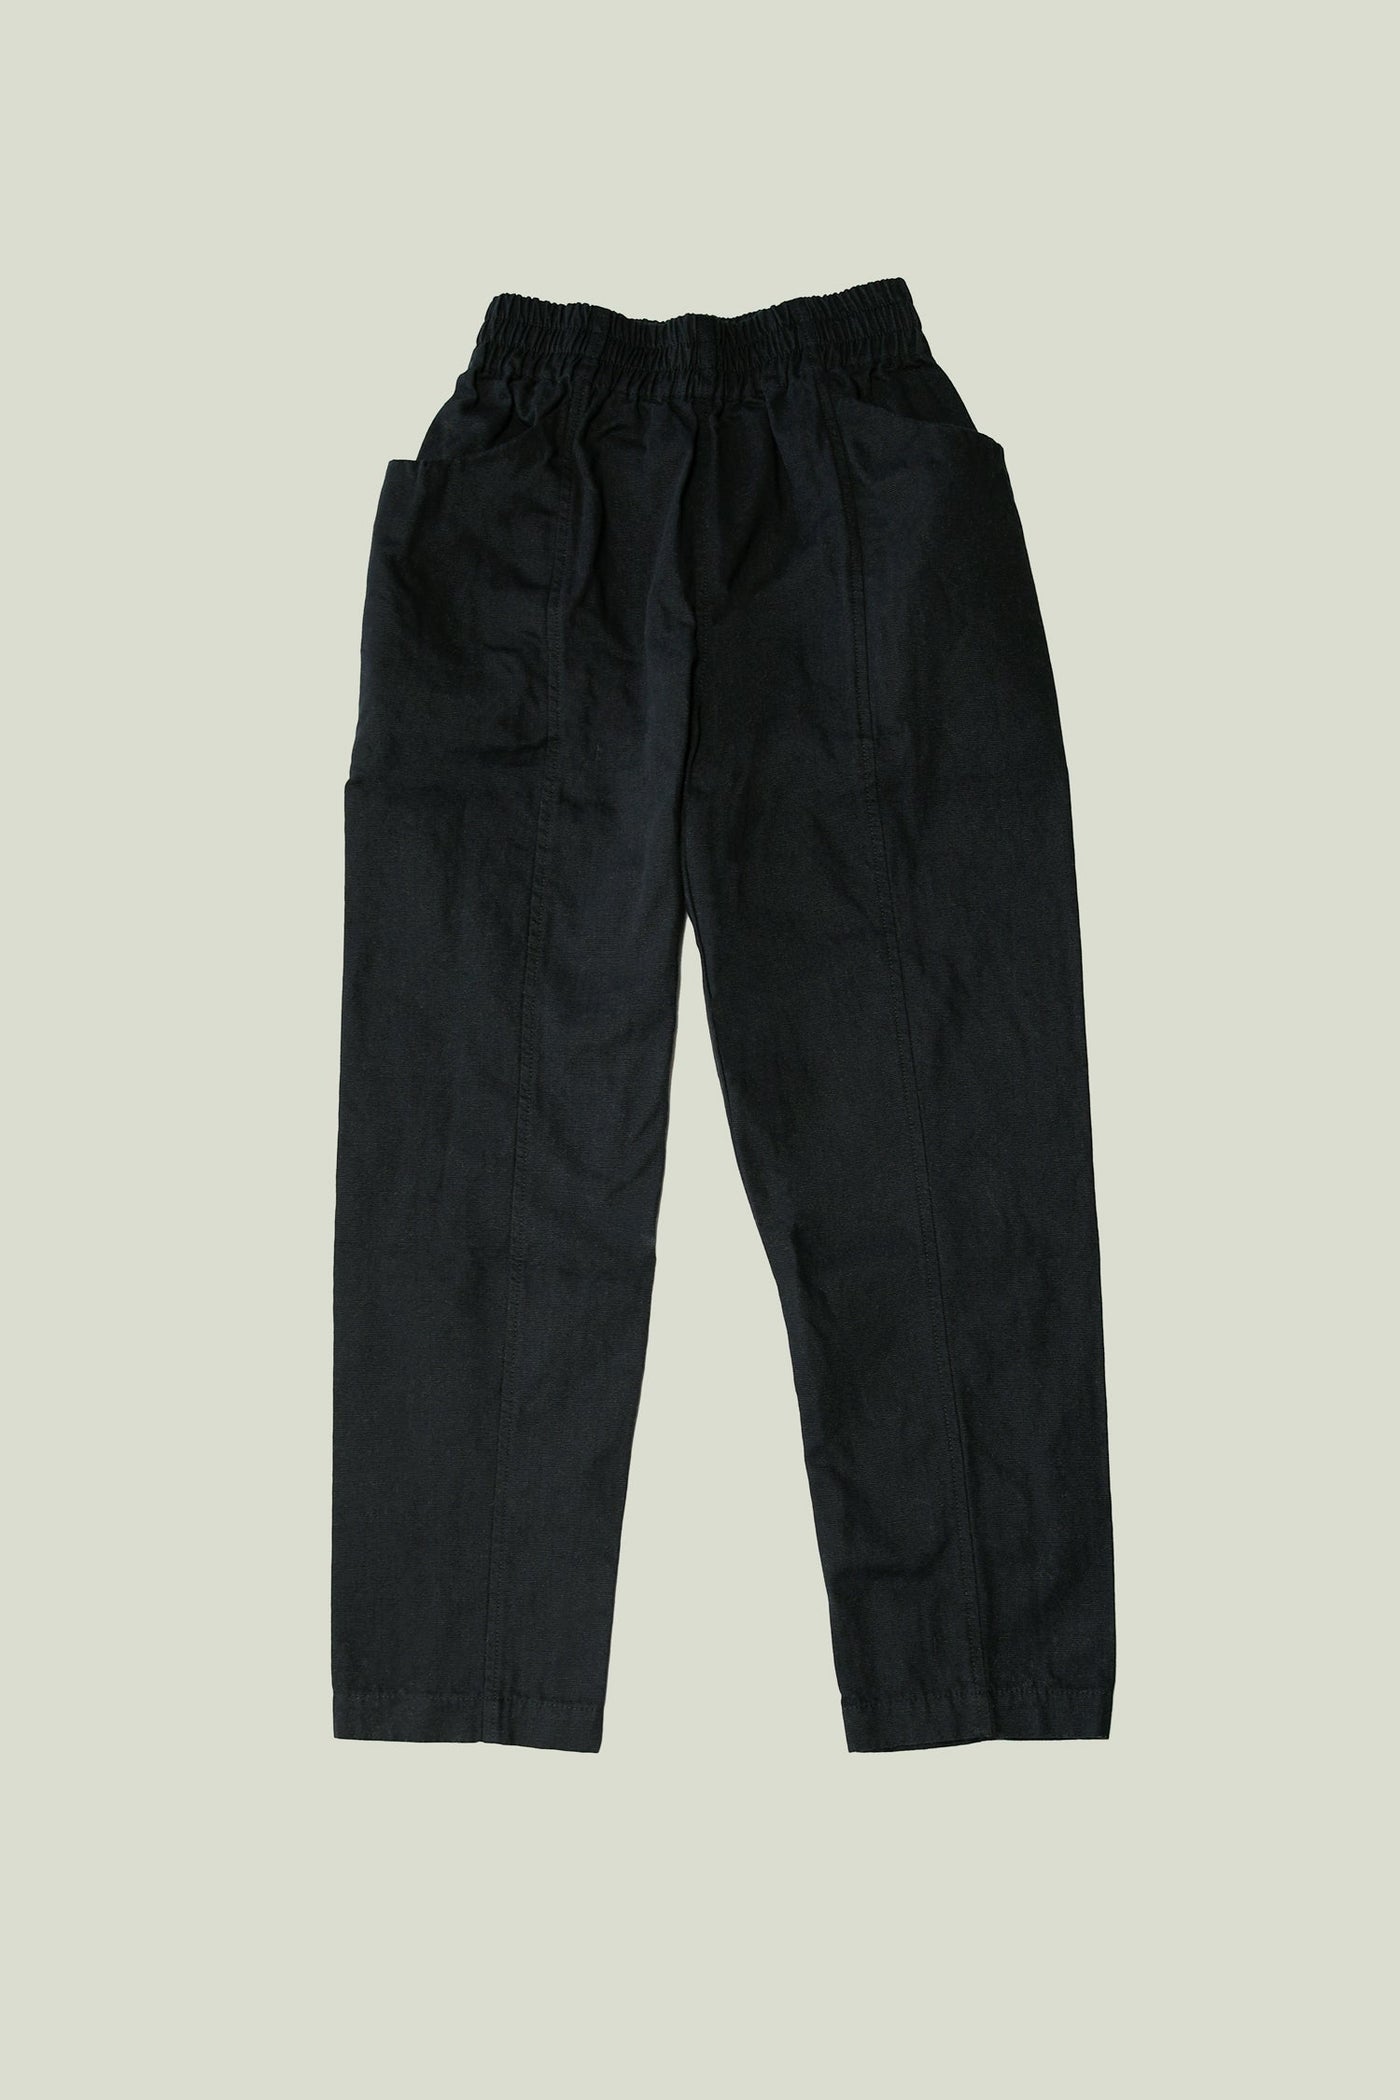 Clyde Work Pant in Upcycled Cotton Canvas Black#color_black